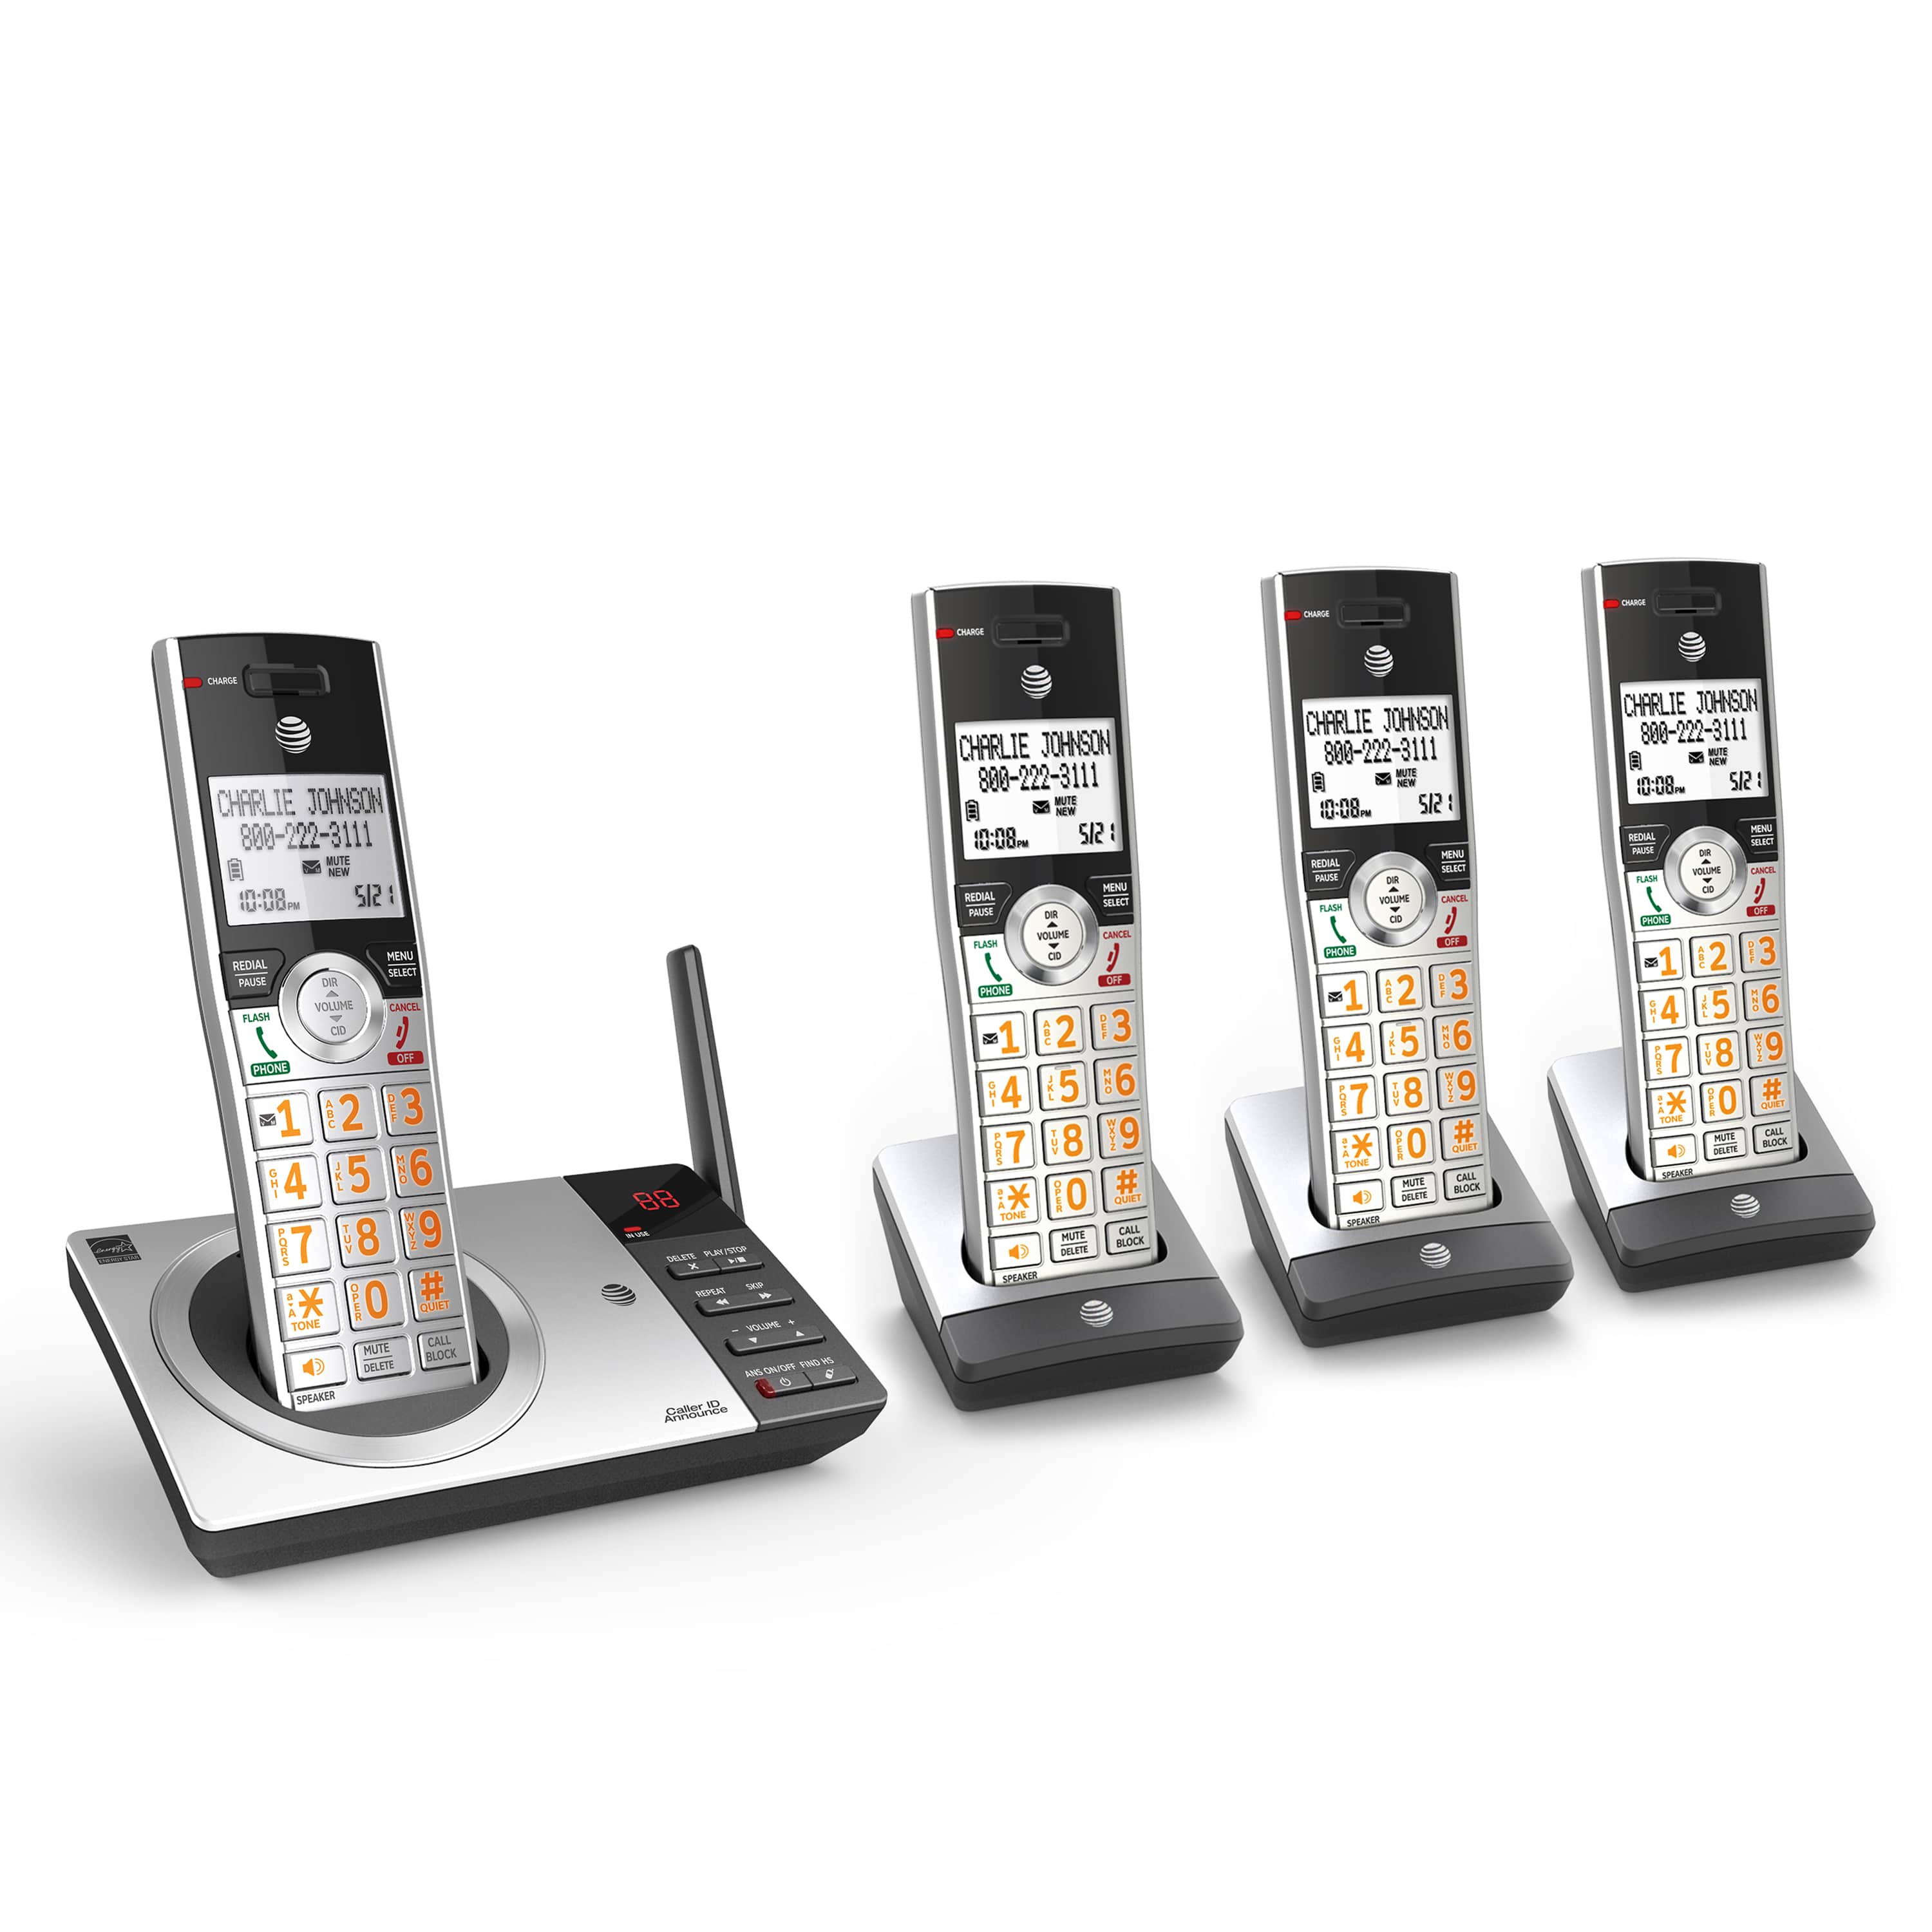 4 handset cordless answering system with smart call blocker - view 3